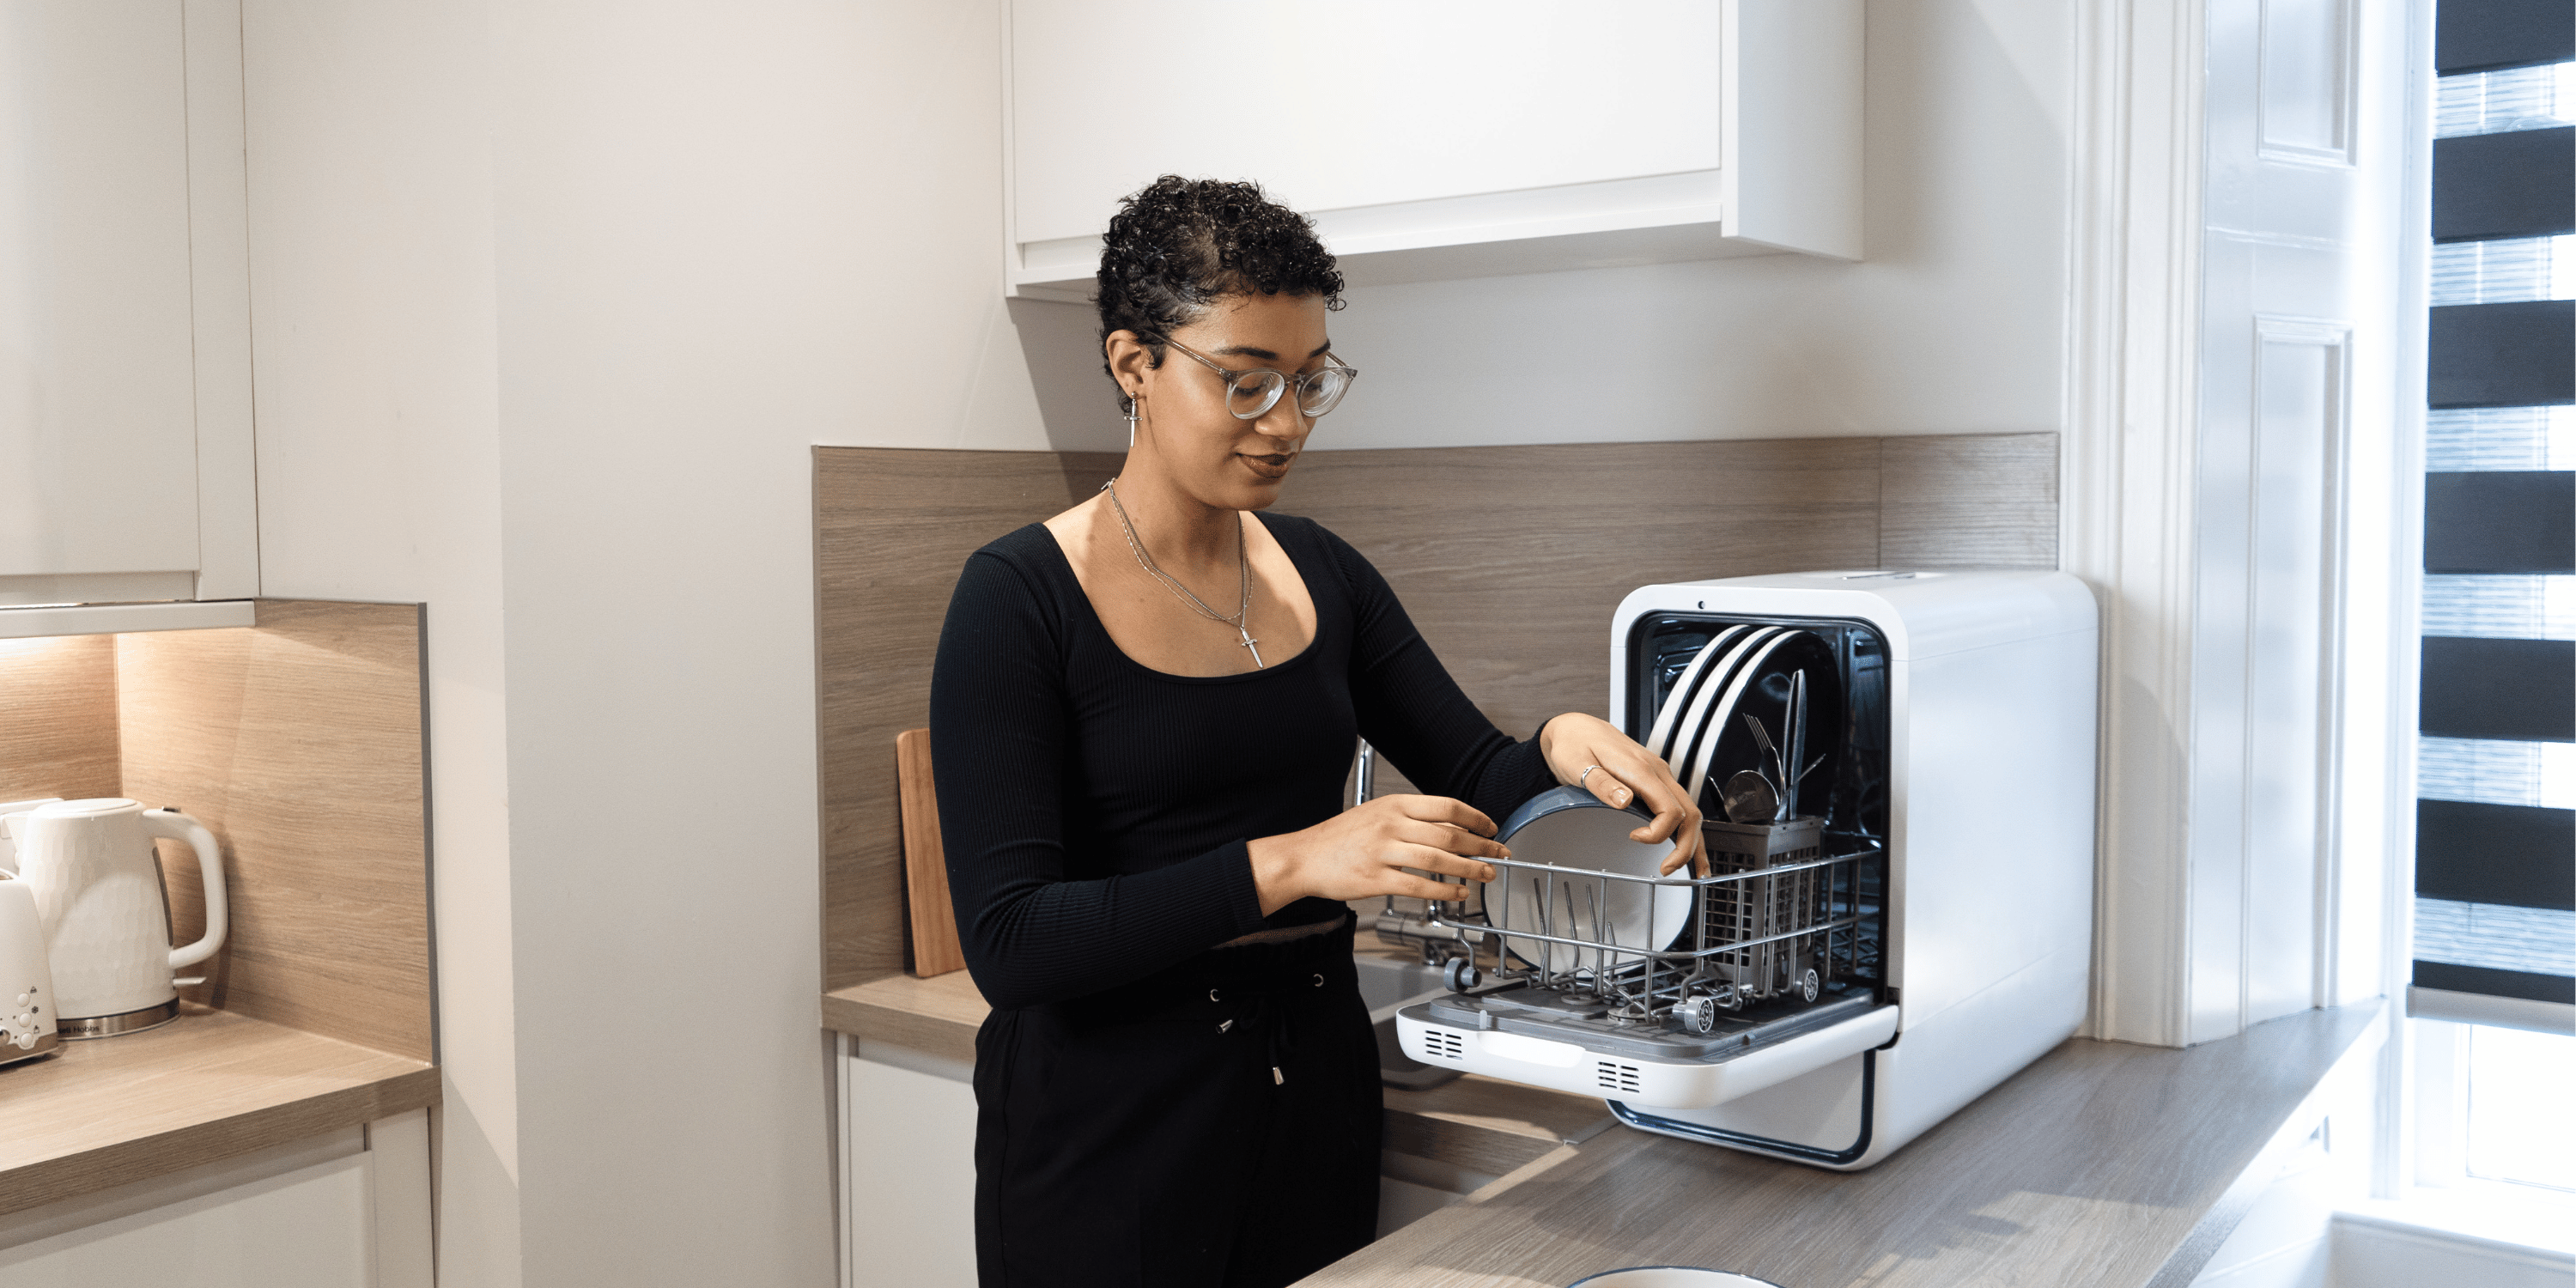 Capsule Personal Dishwasher by Loch Electronics